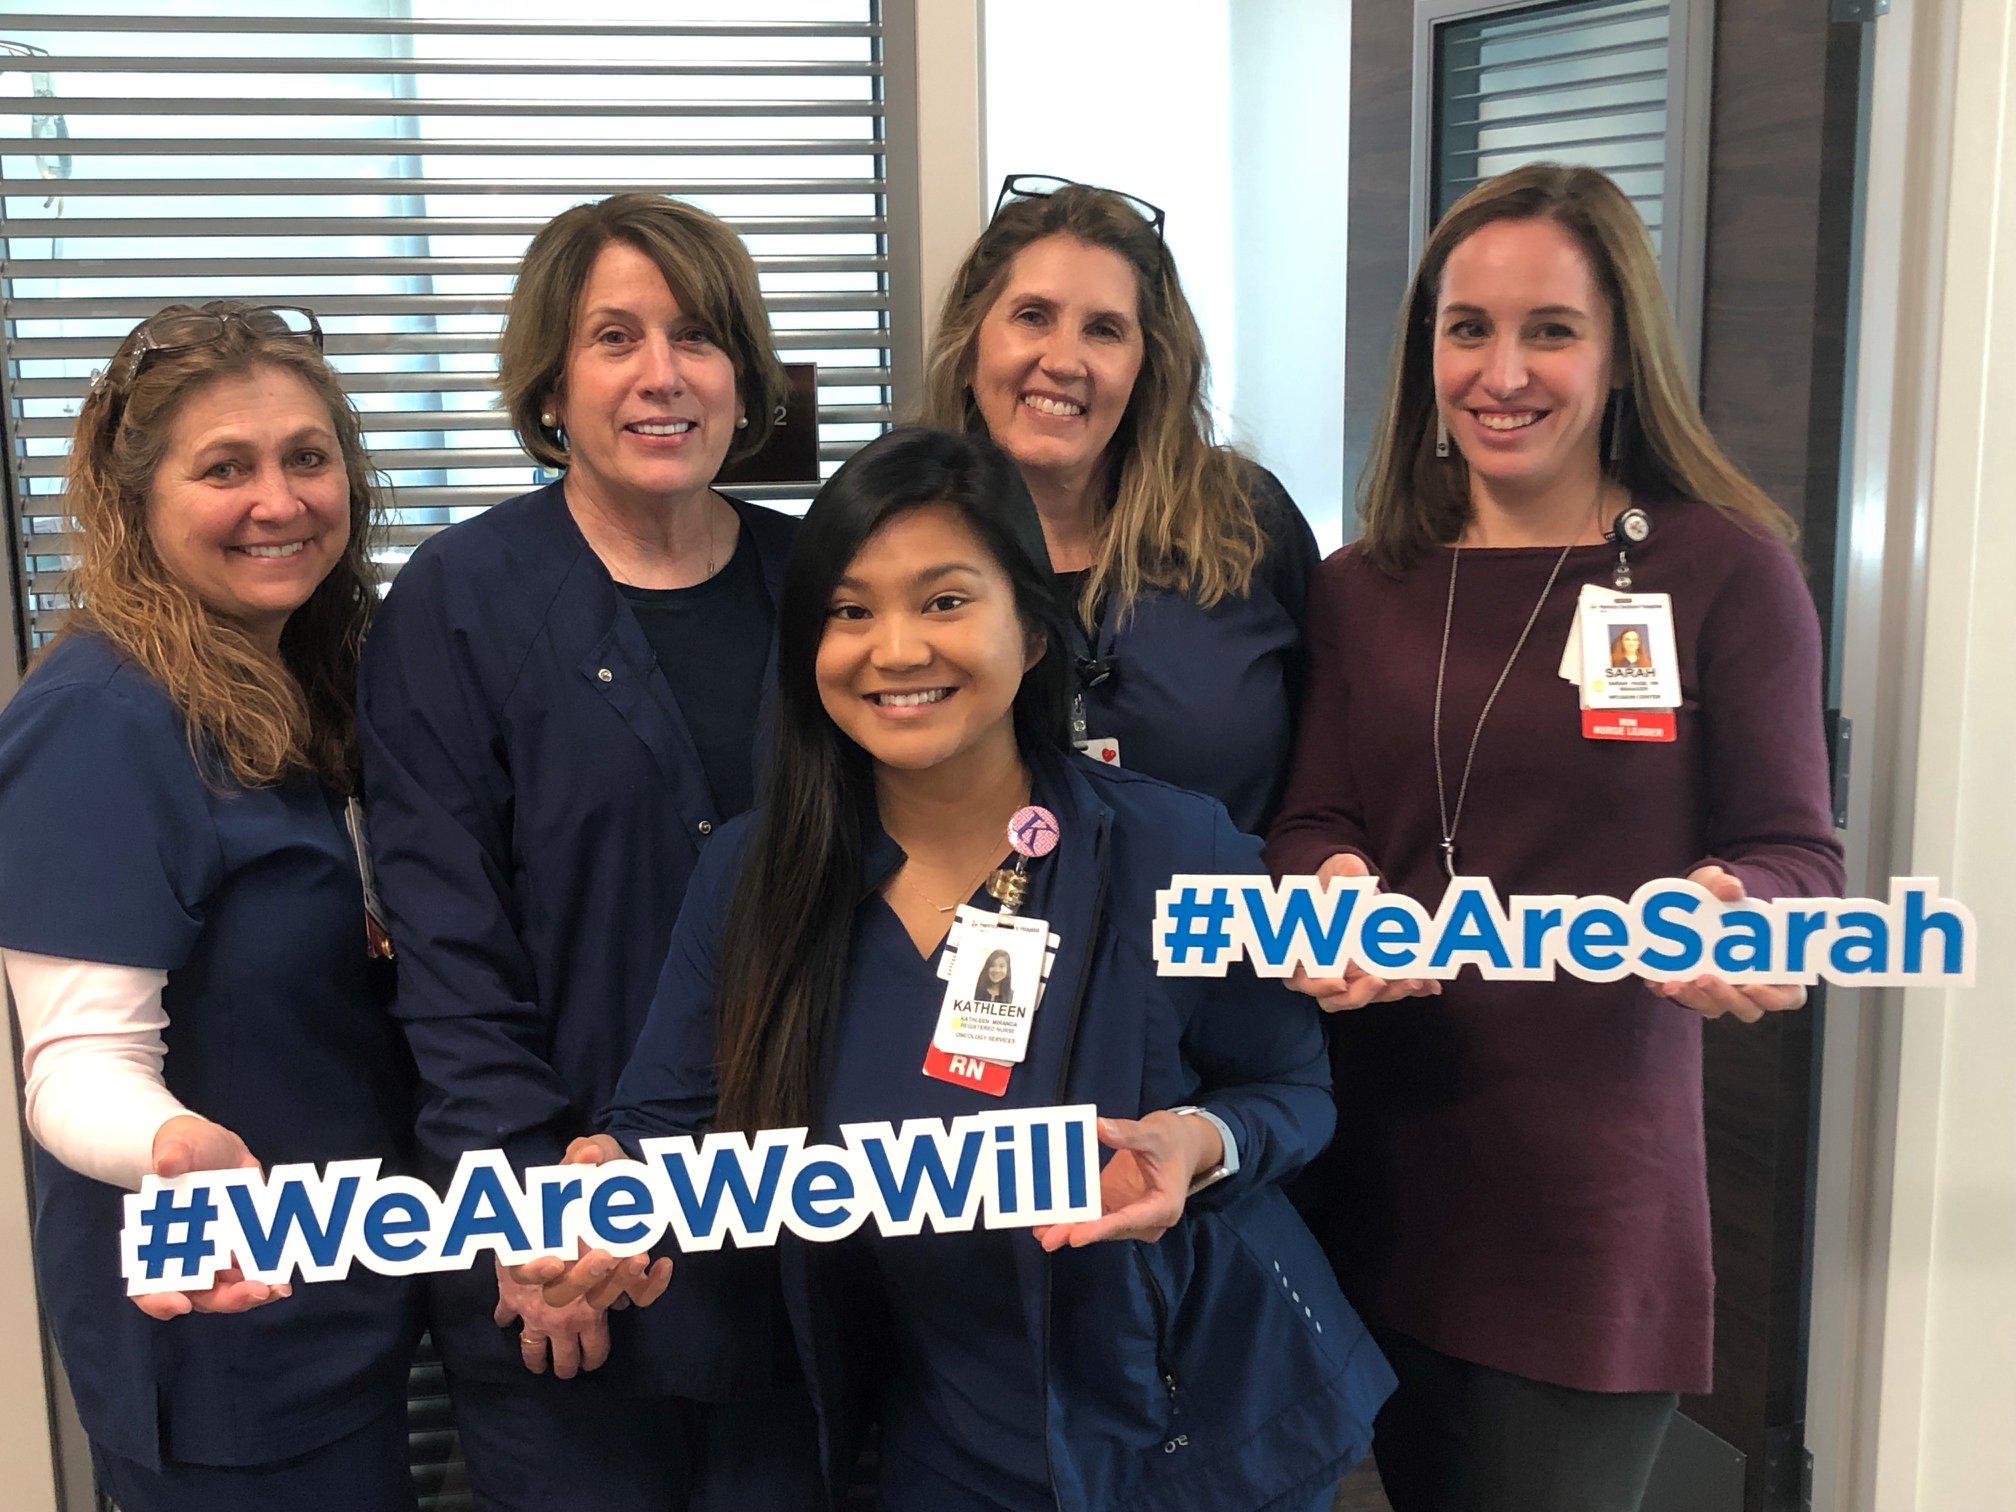 A group of nurses holding signs that say #WeAreWeWill and #WeAreSarah